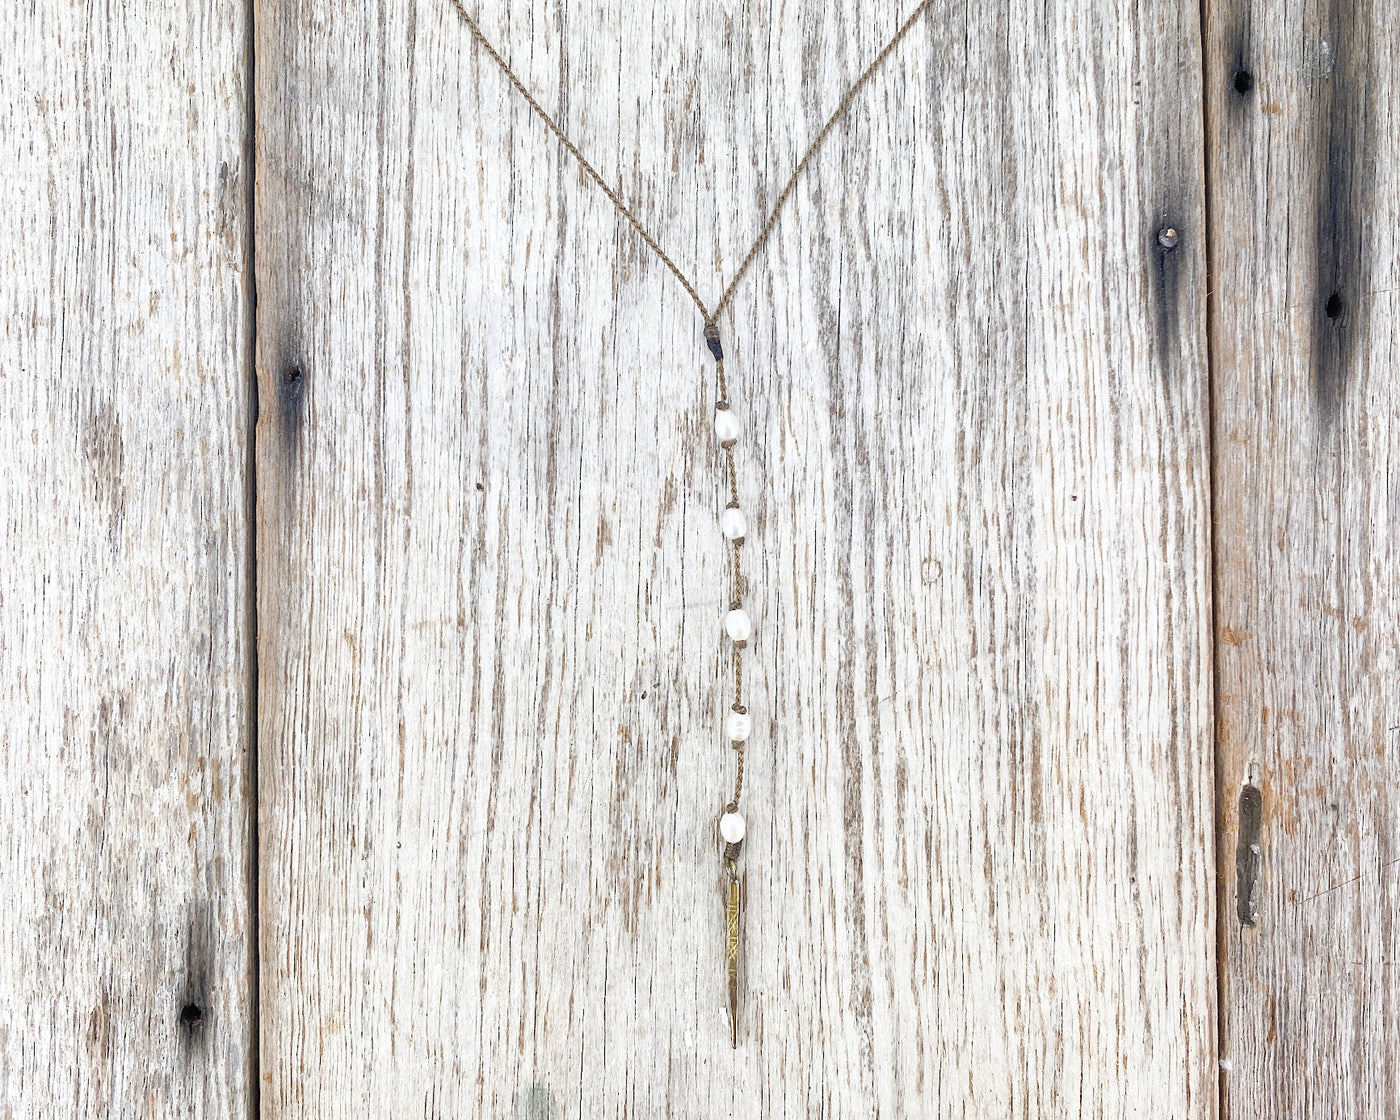 Y Necklace Petite-0040-White Pearl Rice Petite